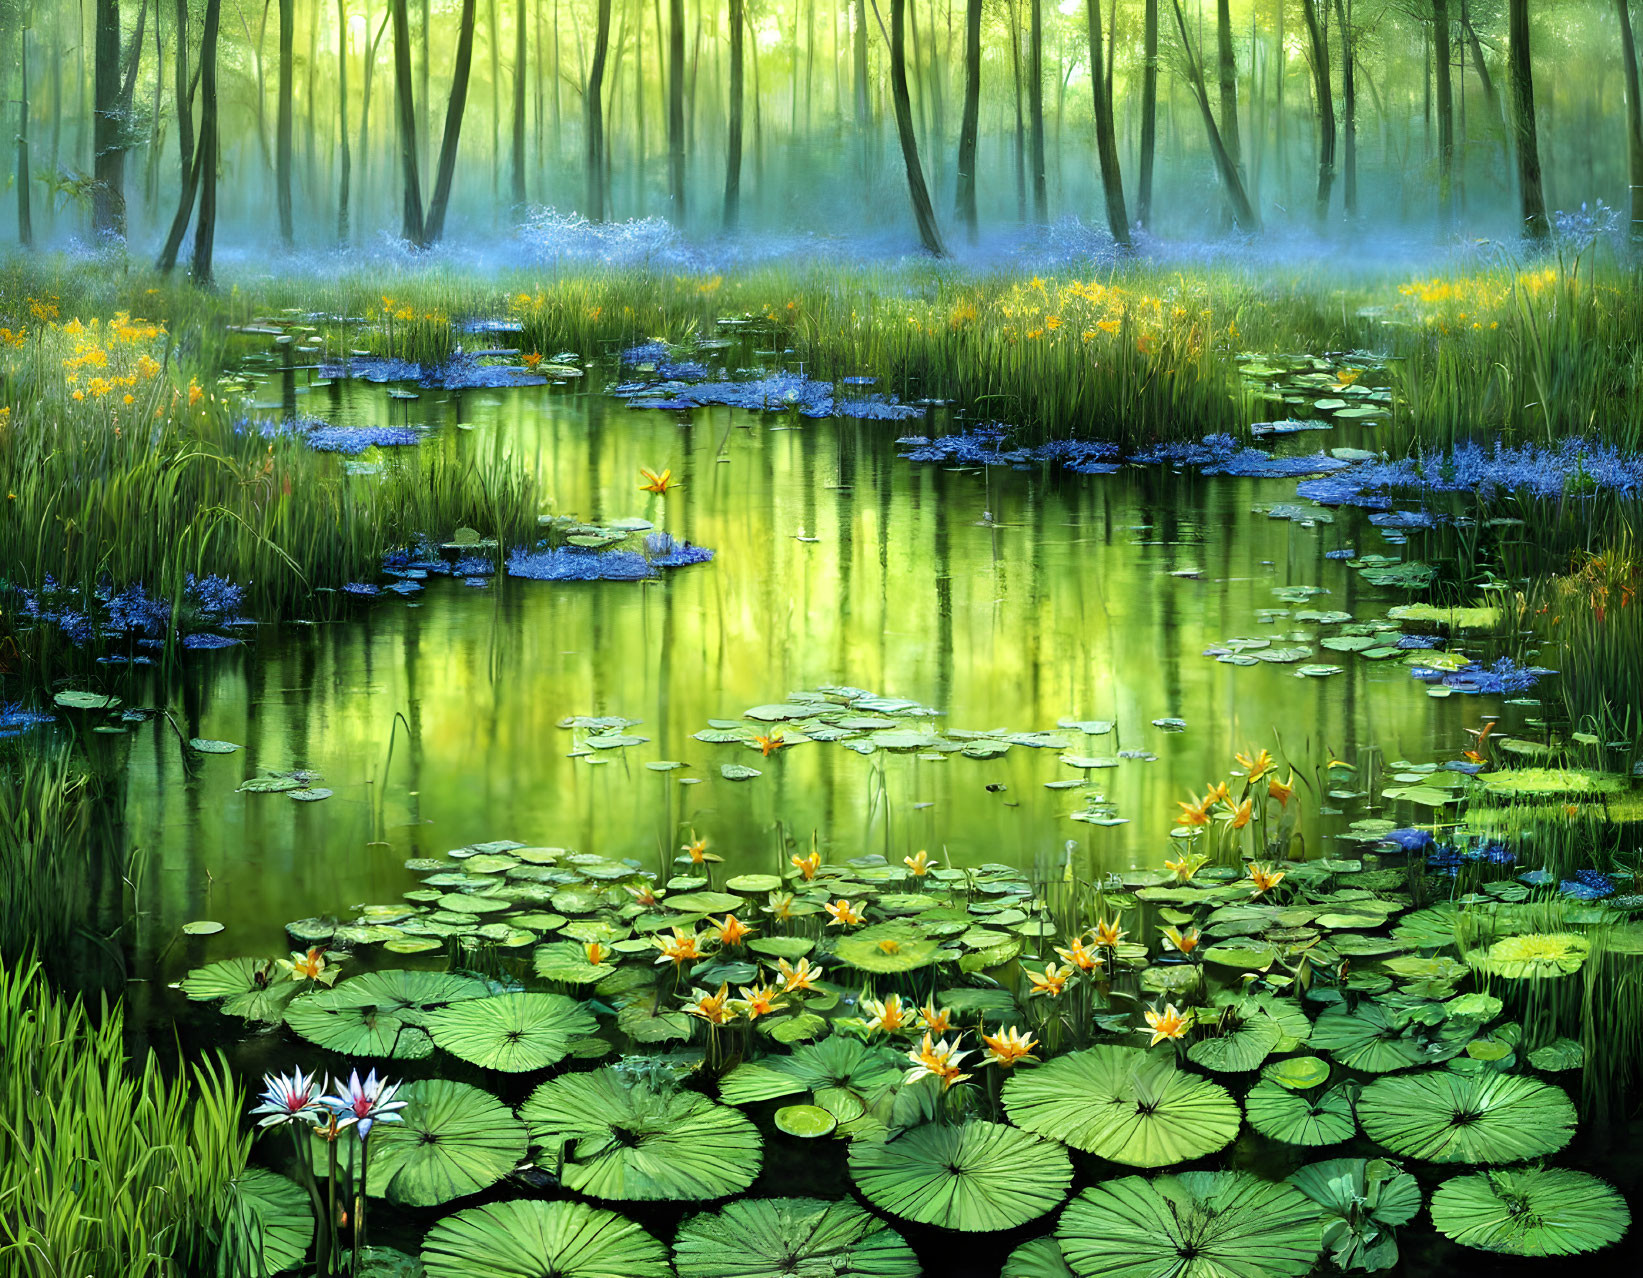 Tranquil forest pond with lily pads and blossoming flowers